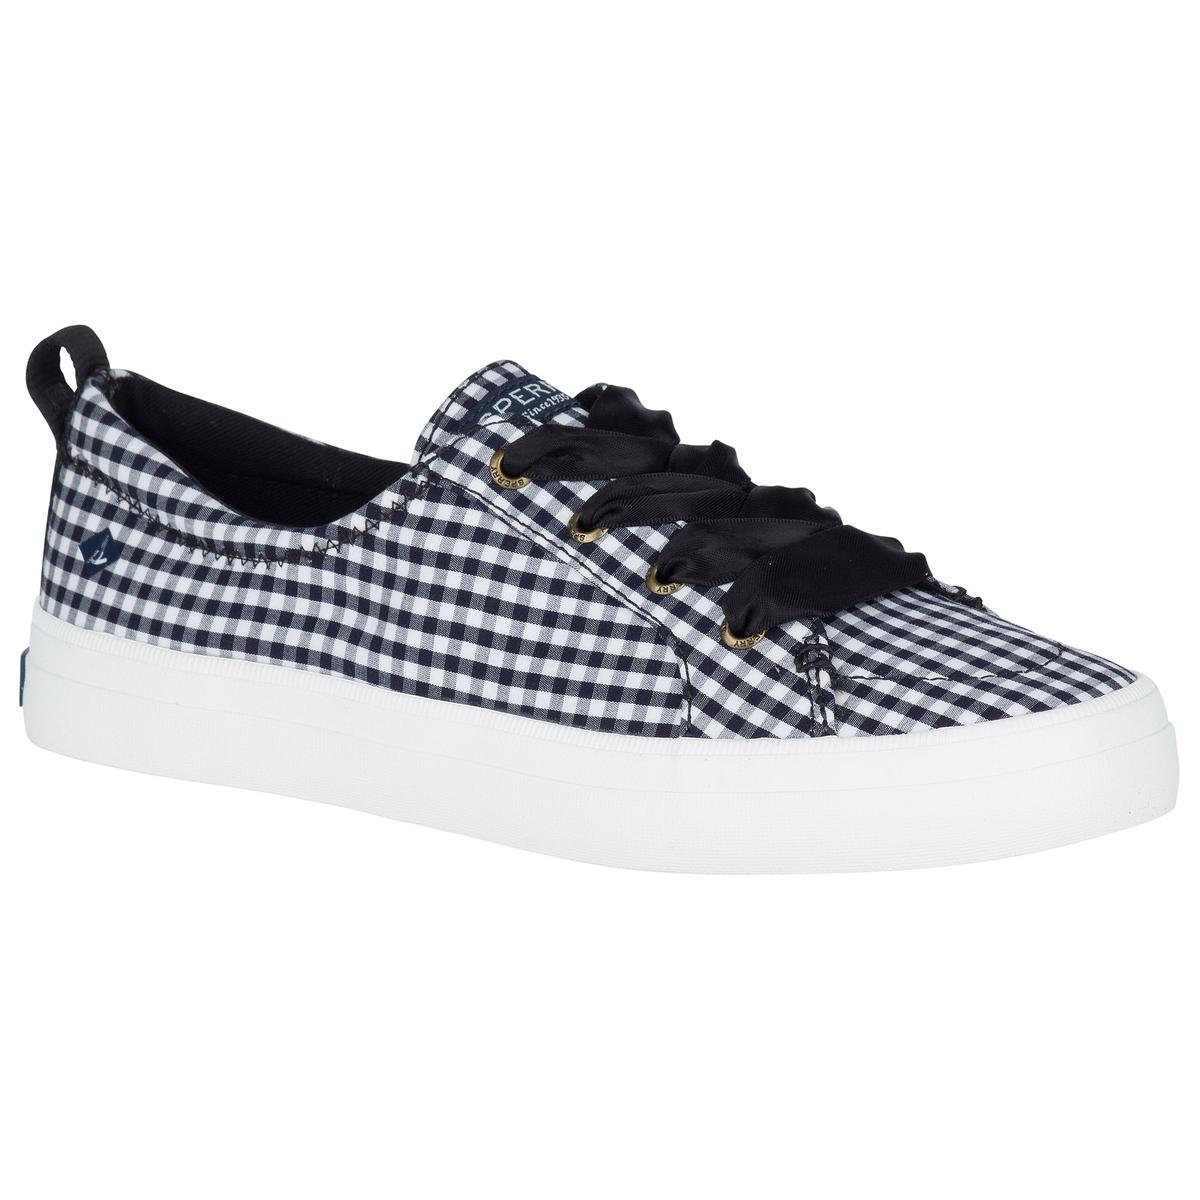 Sperry Women's Crest Vibe Gingham Casual Shoes - Sun & Ski Sports